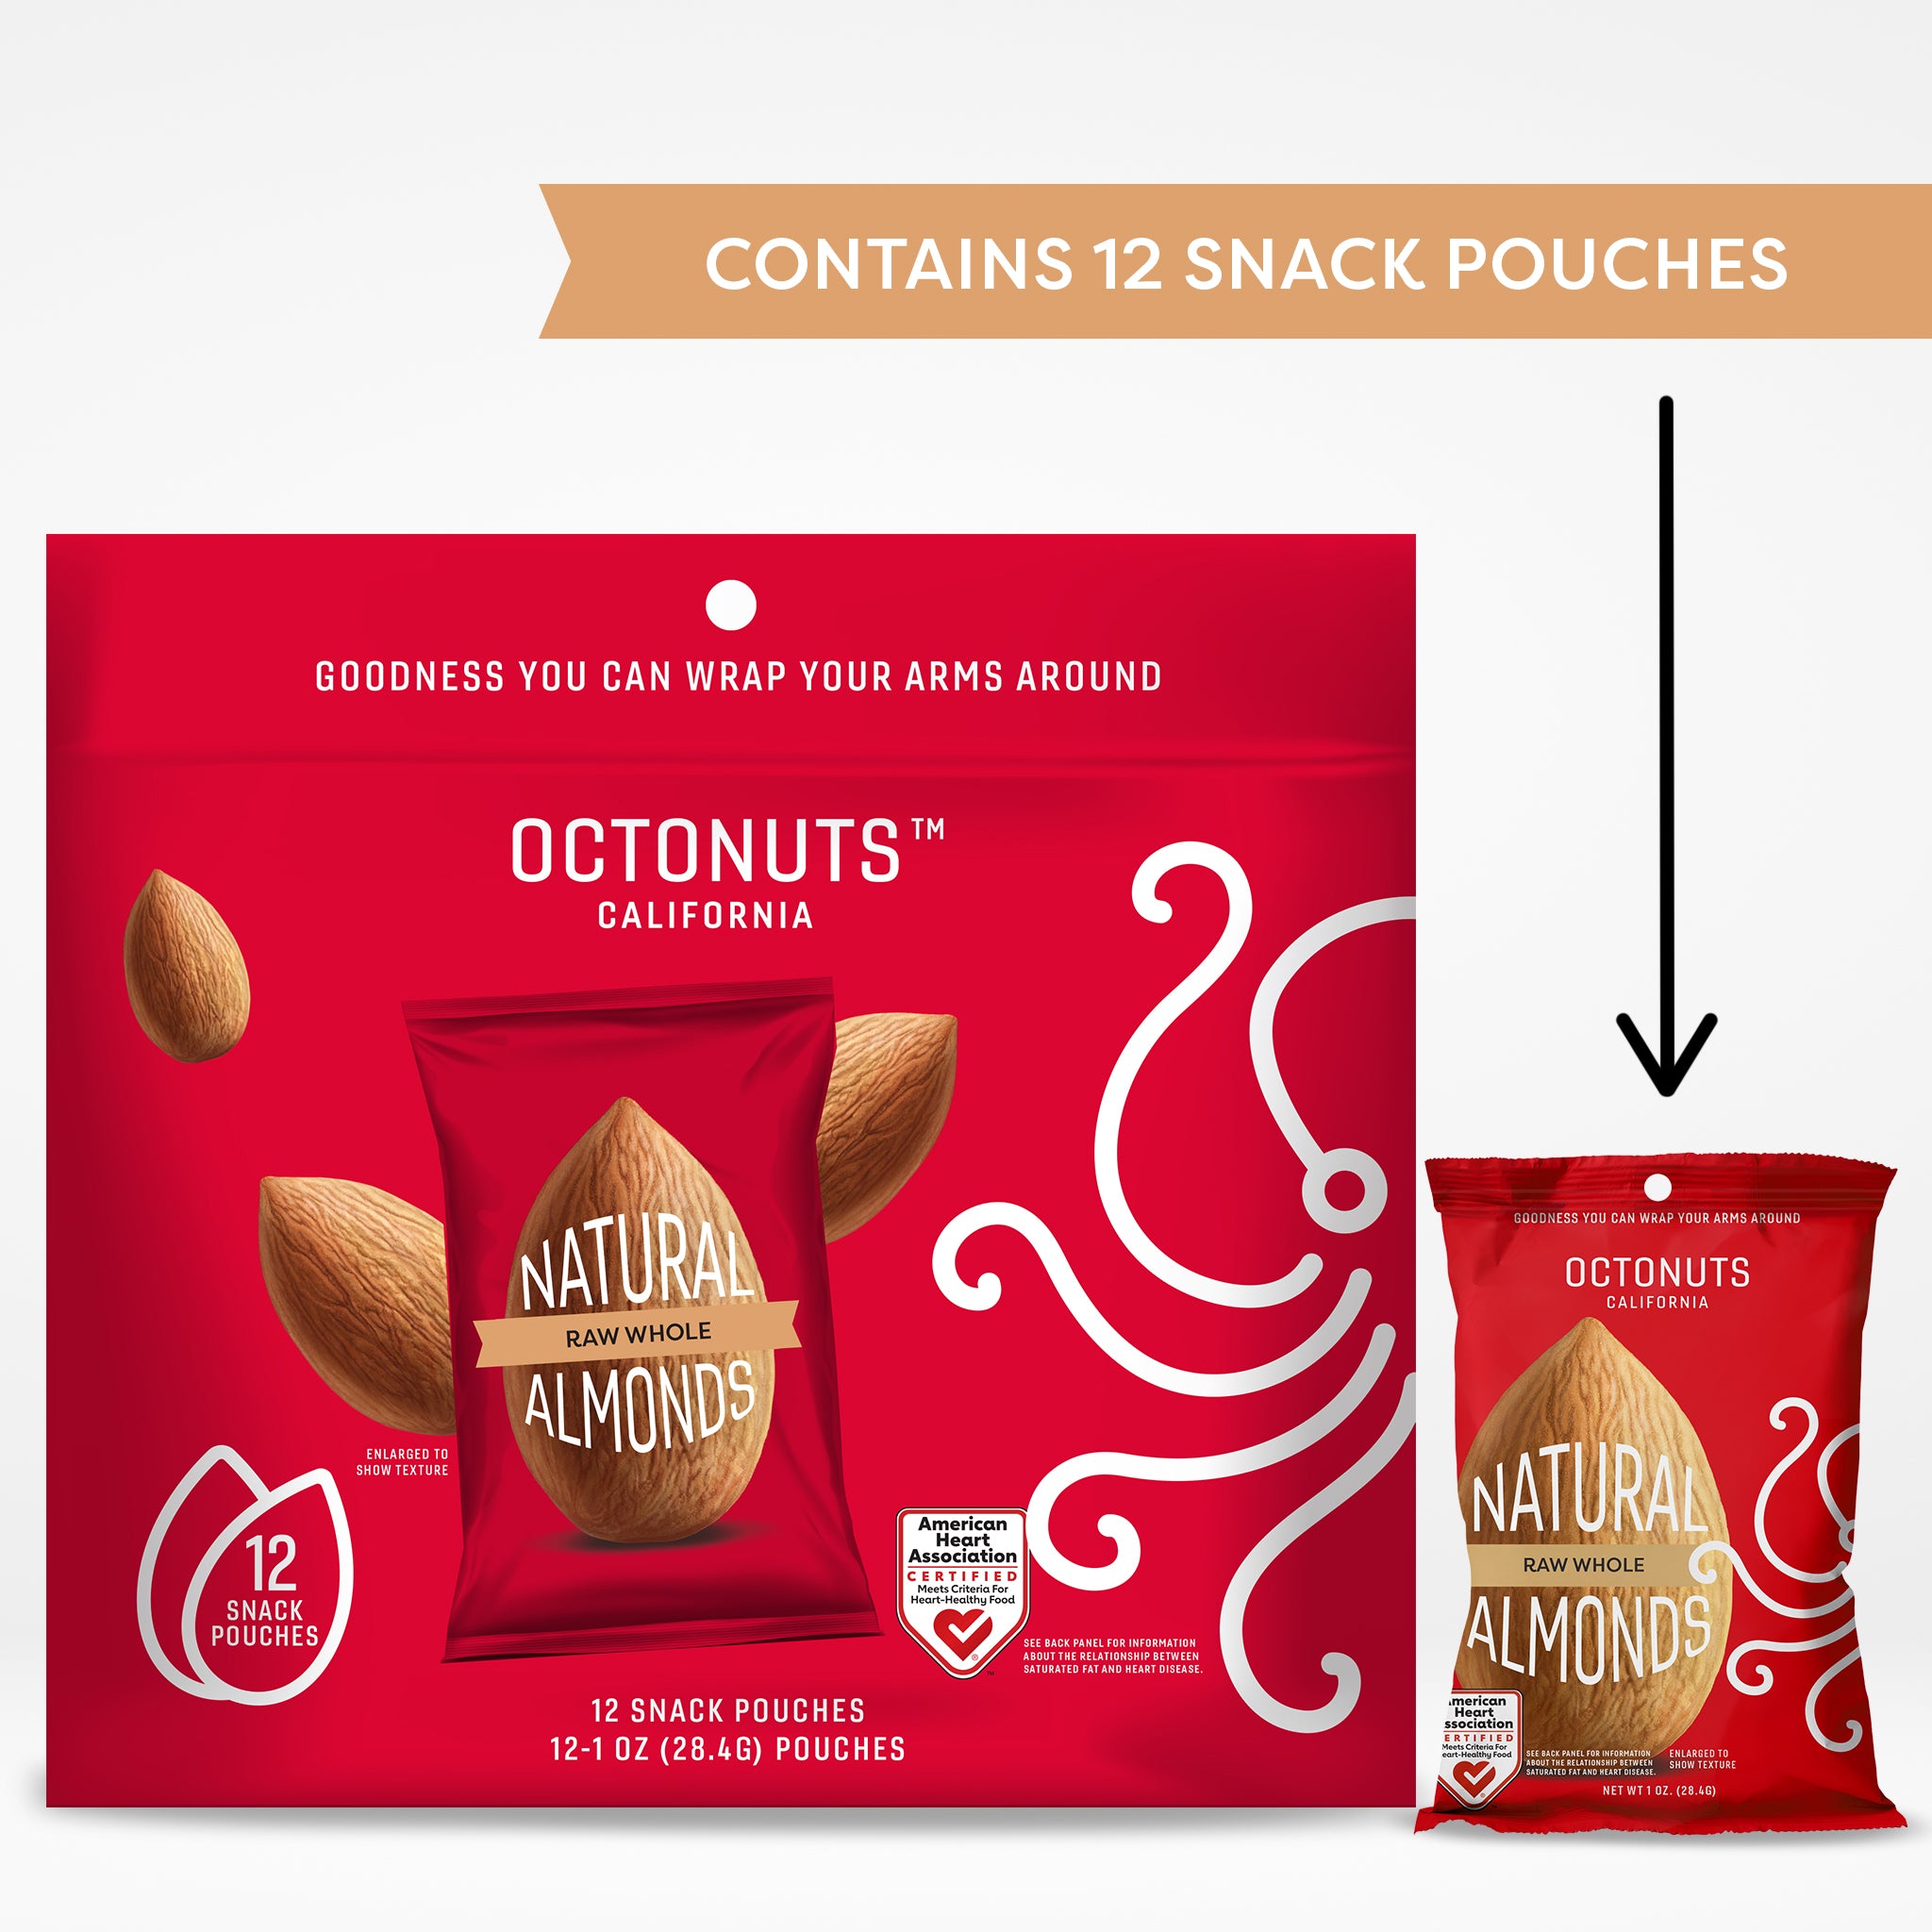 Raw Whole Almonds Multipack- Contains 12 Snacks Pouches